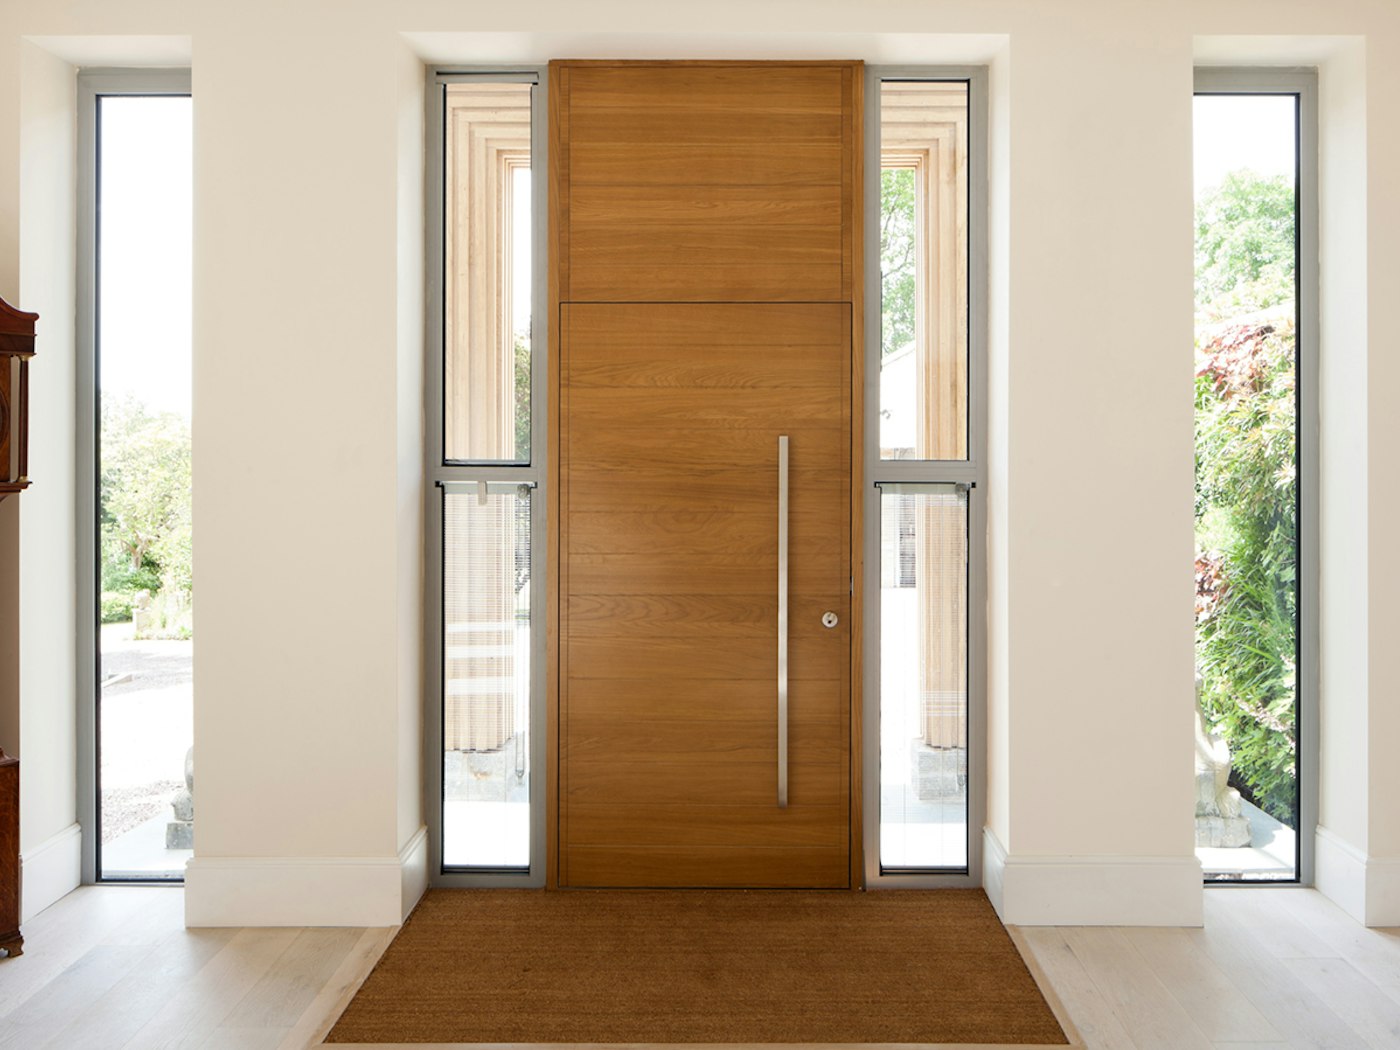 Urban Front doors can be fit into any architectural glazing or glass walling